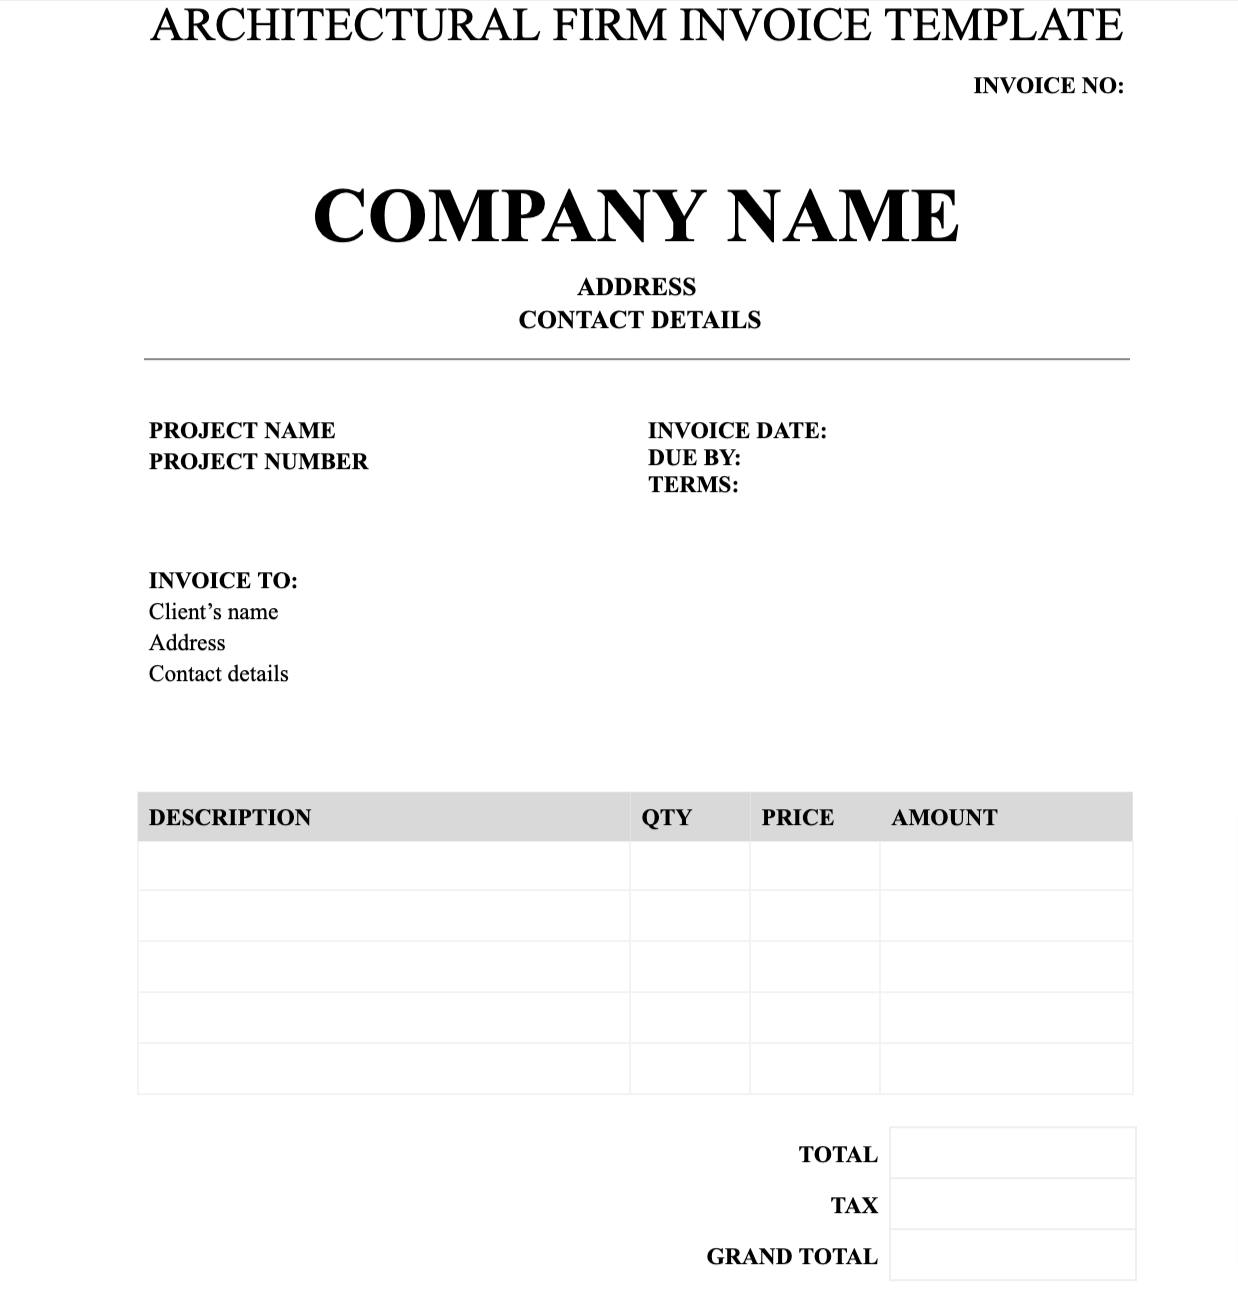 Architectural firm invoice template